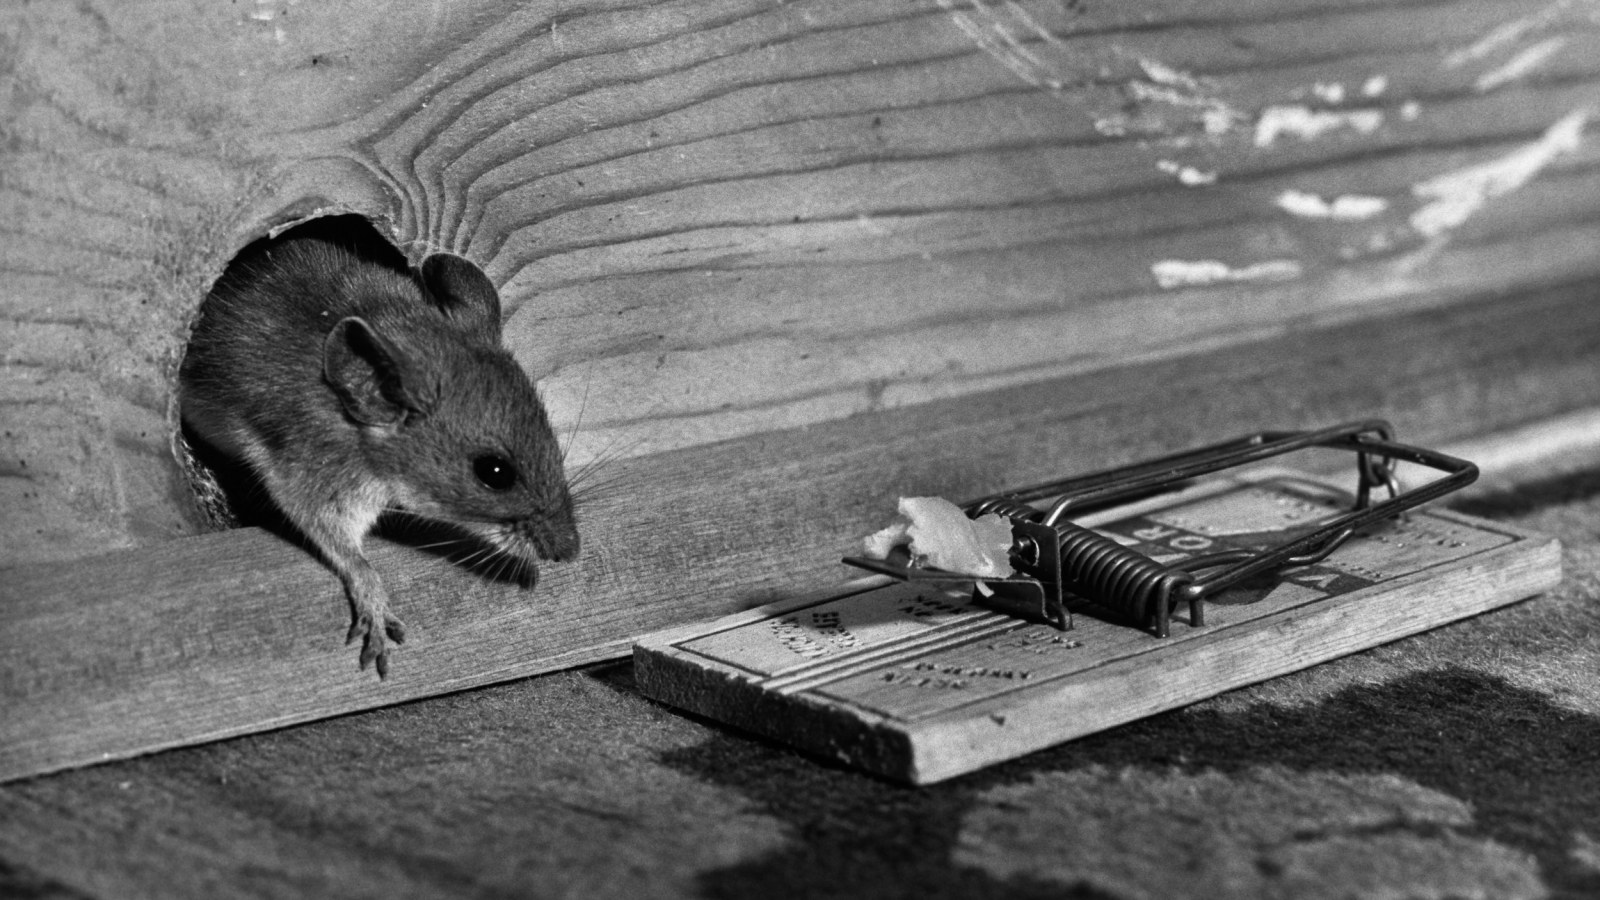 Paleo Man Mouse Trap. Making Arrowheads & Catching Mice. Mousetrap